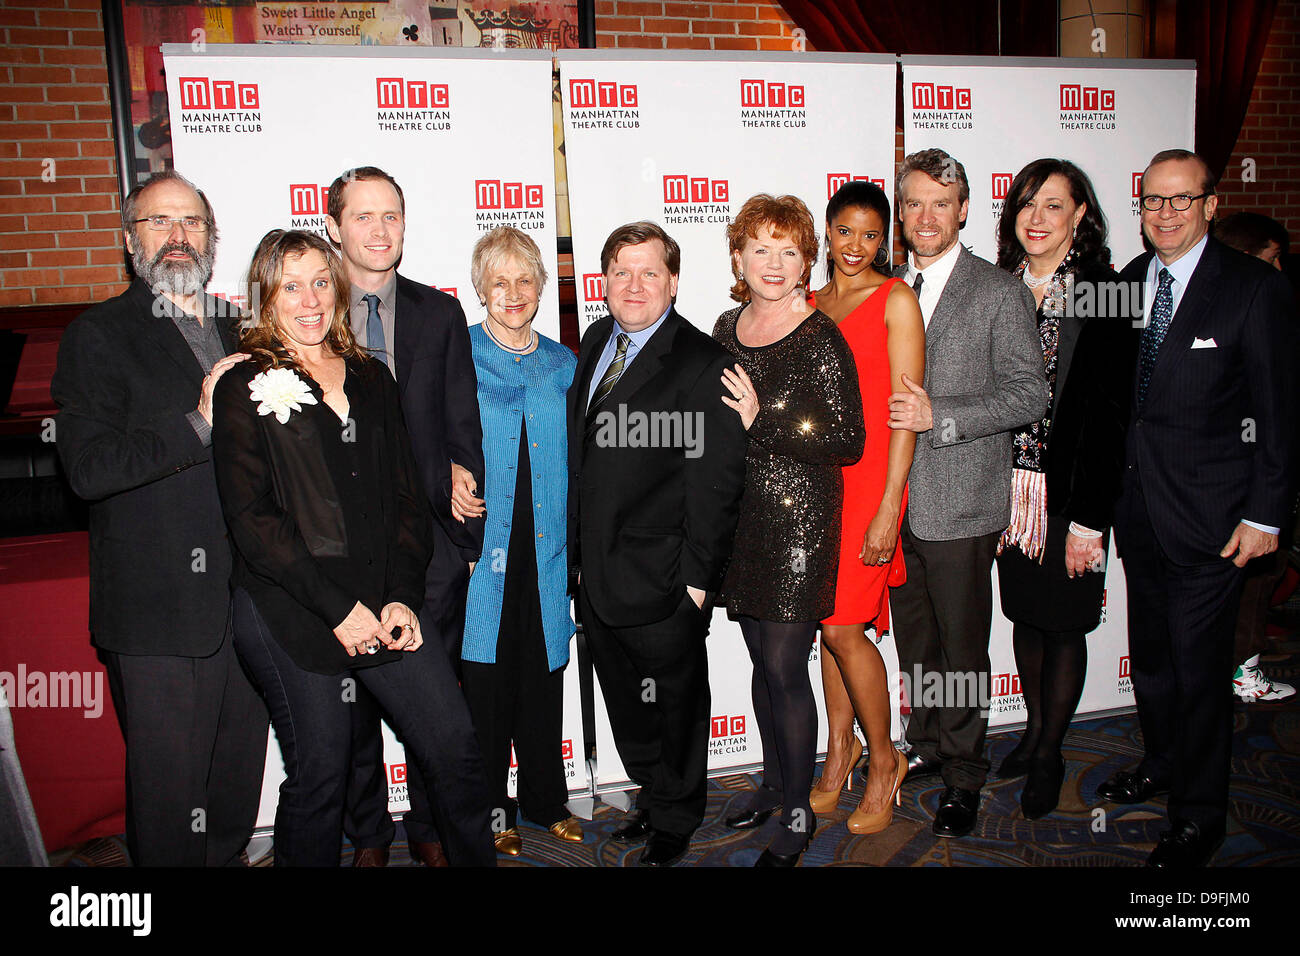 Daniel Sullivan, Frances McDormand, Patrick Carroll, Estelle Parsons, David Lindsay-Abaire, Becky Ann Baker, Renee Elise Goldsberry, Tate Donovan, Lynne Meadow and Barry Grove Opening night after party for the Broadway production of 'Good People' held at B.B. King's show room. New York City, USA - 03.03.11 Stock Photo